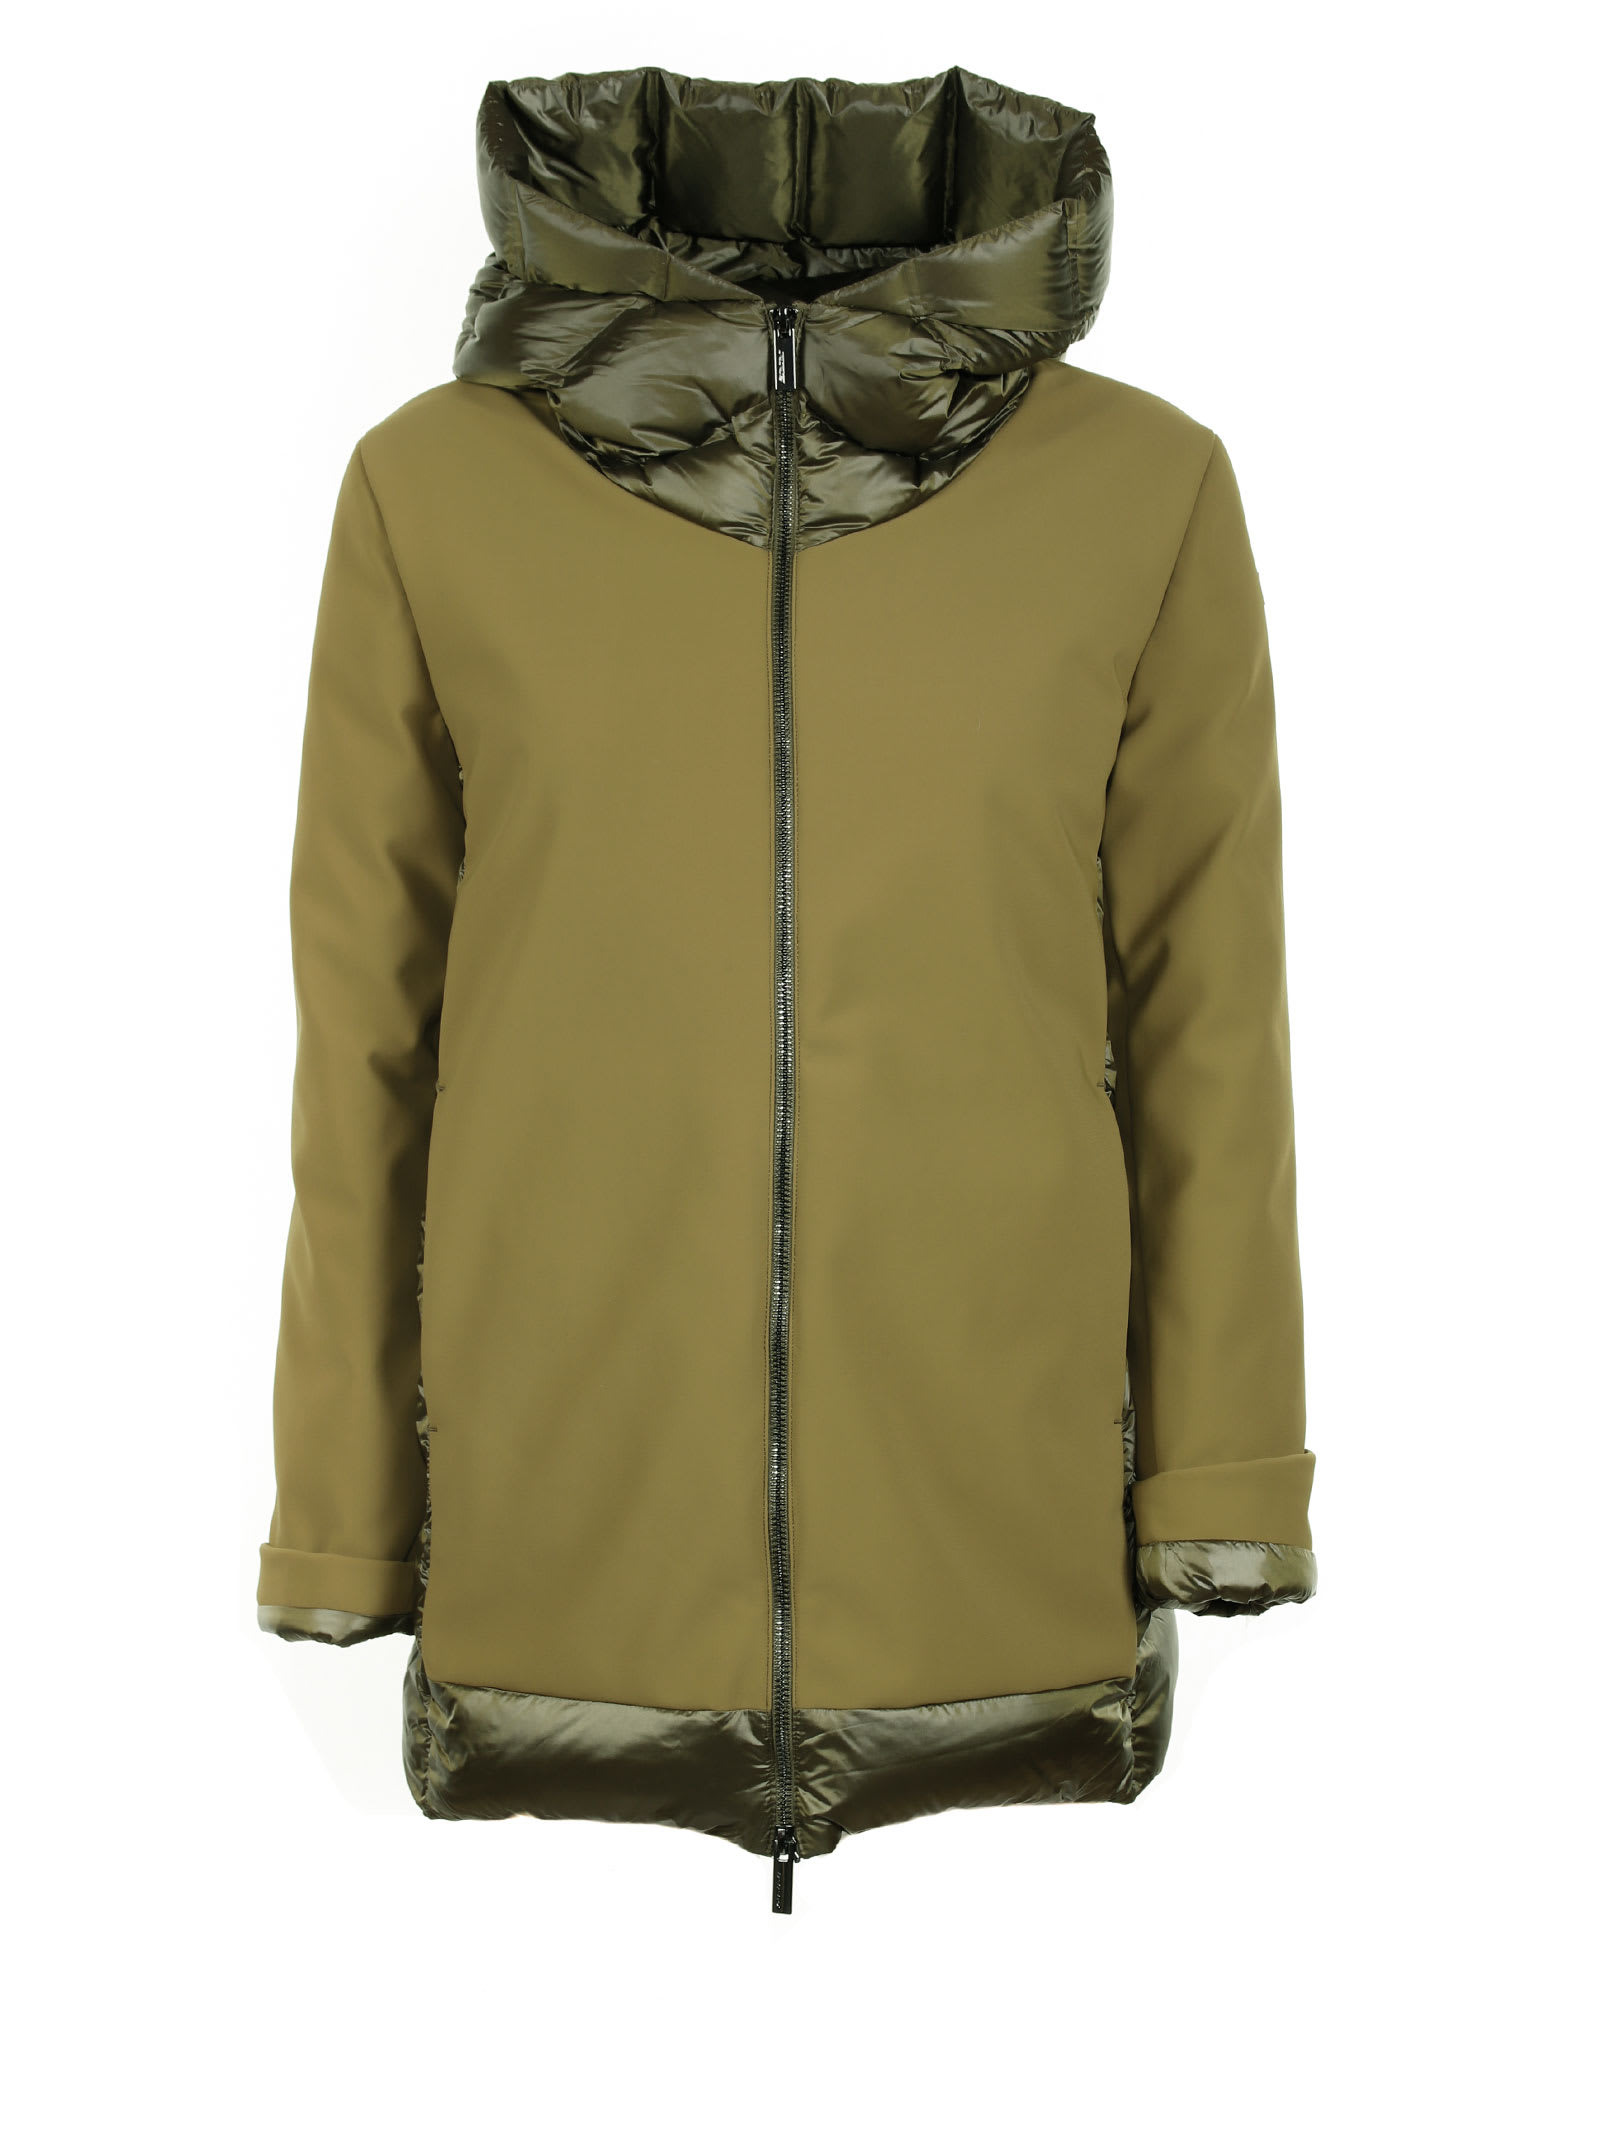 RRD - Roberto Ricci Design Jacket With Down Jacket On The Back